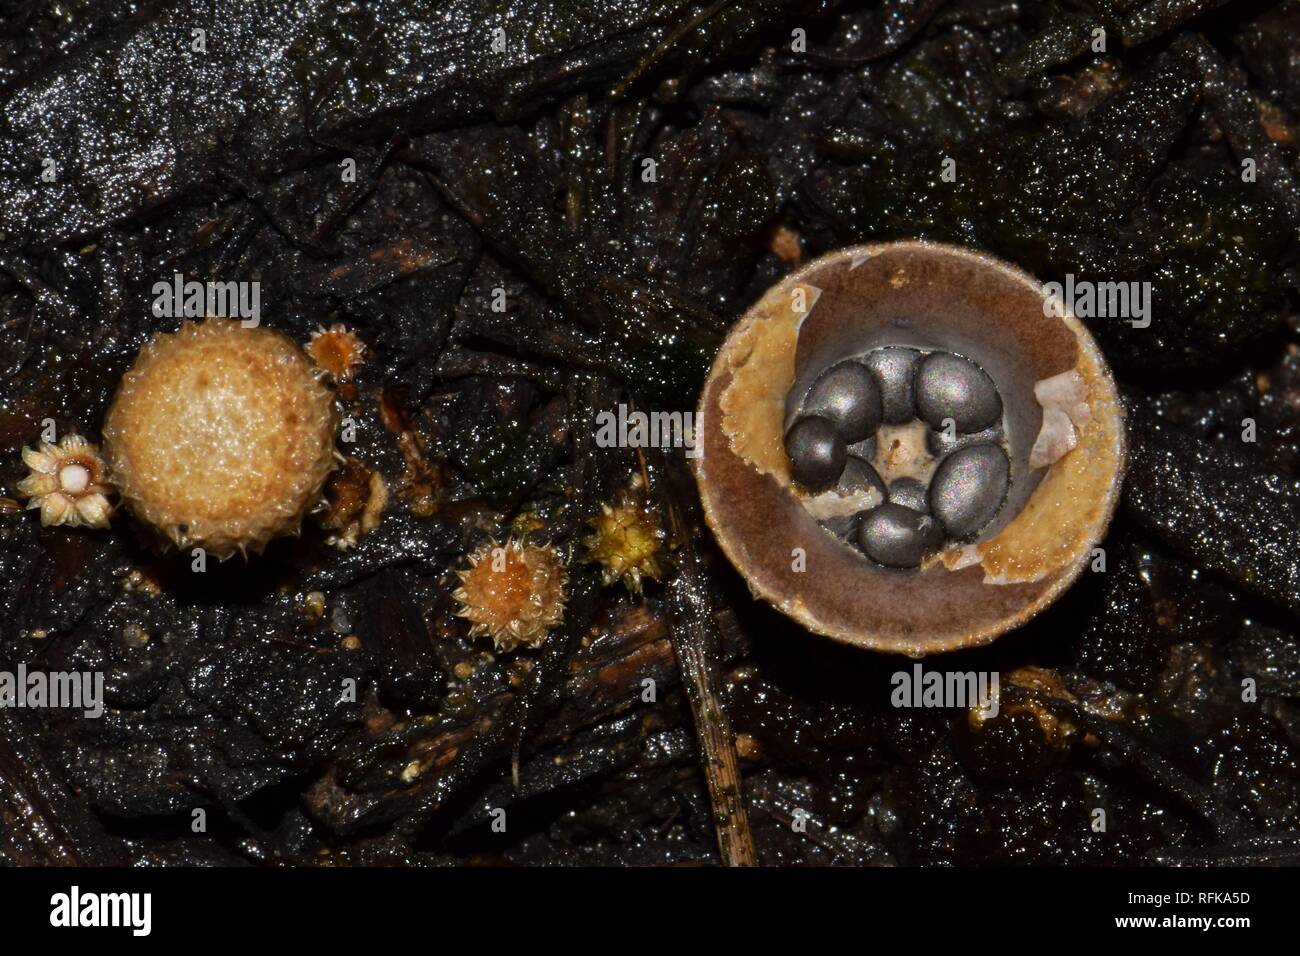 Found in the tropics of North America, the Bird Nest fungus is common and can be found amid damp garden mulch. The fungus resembles a bird's nest. Stock Photo